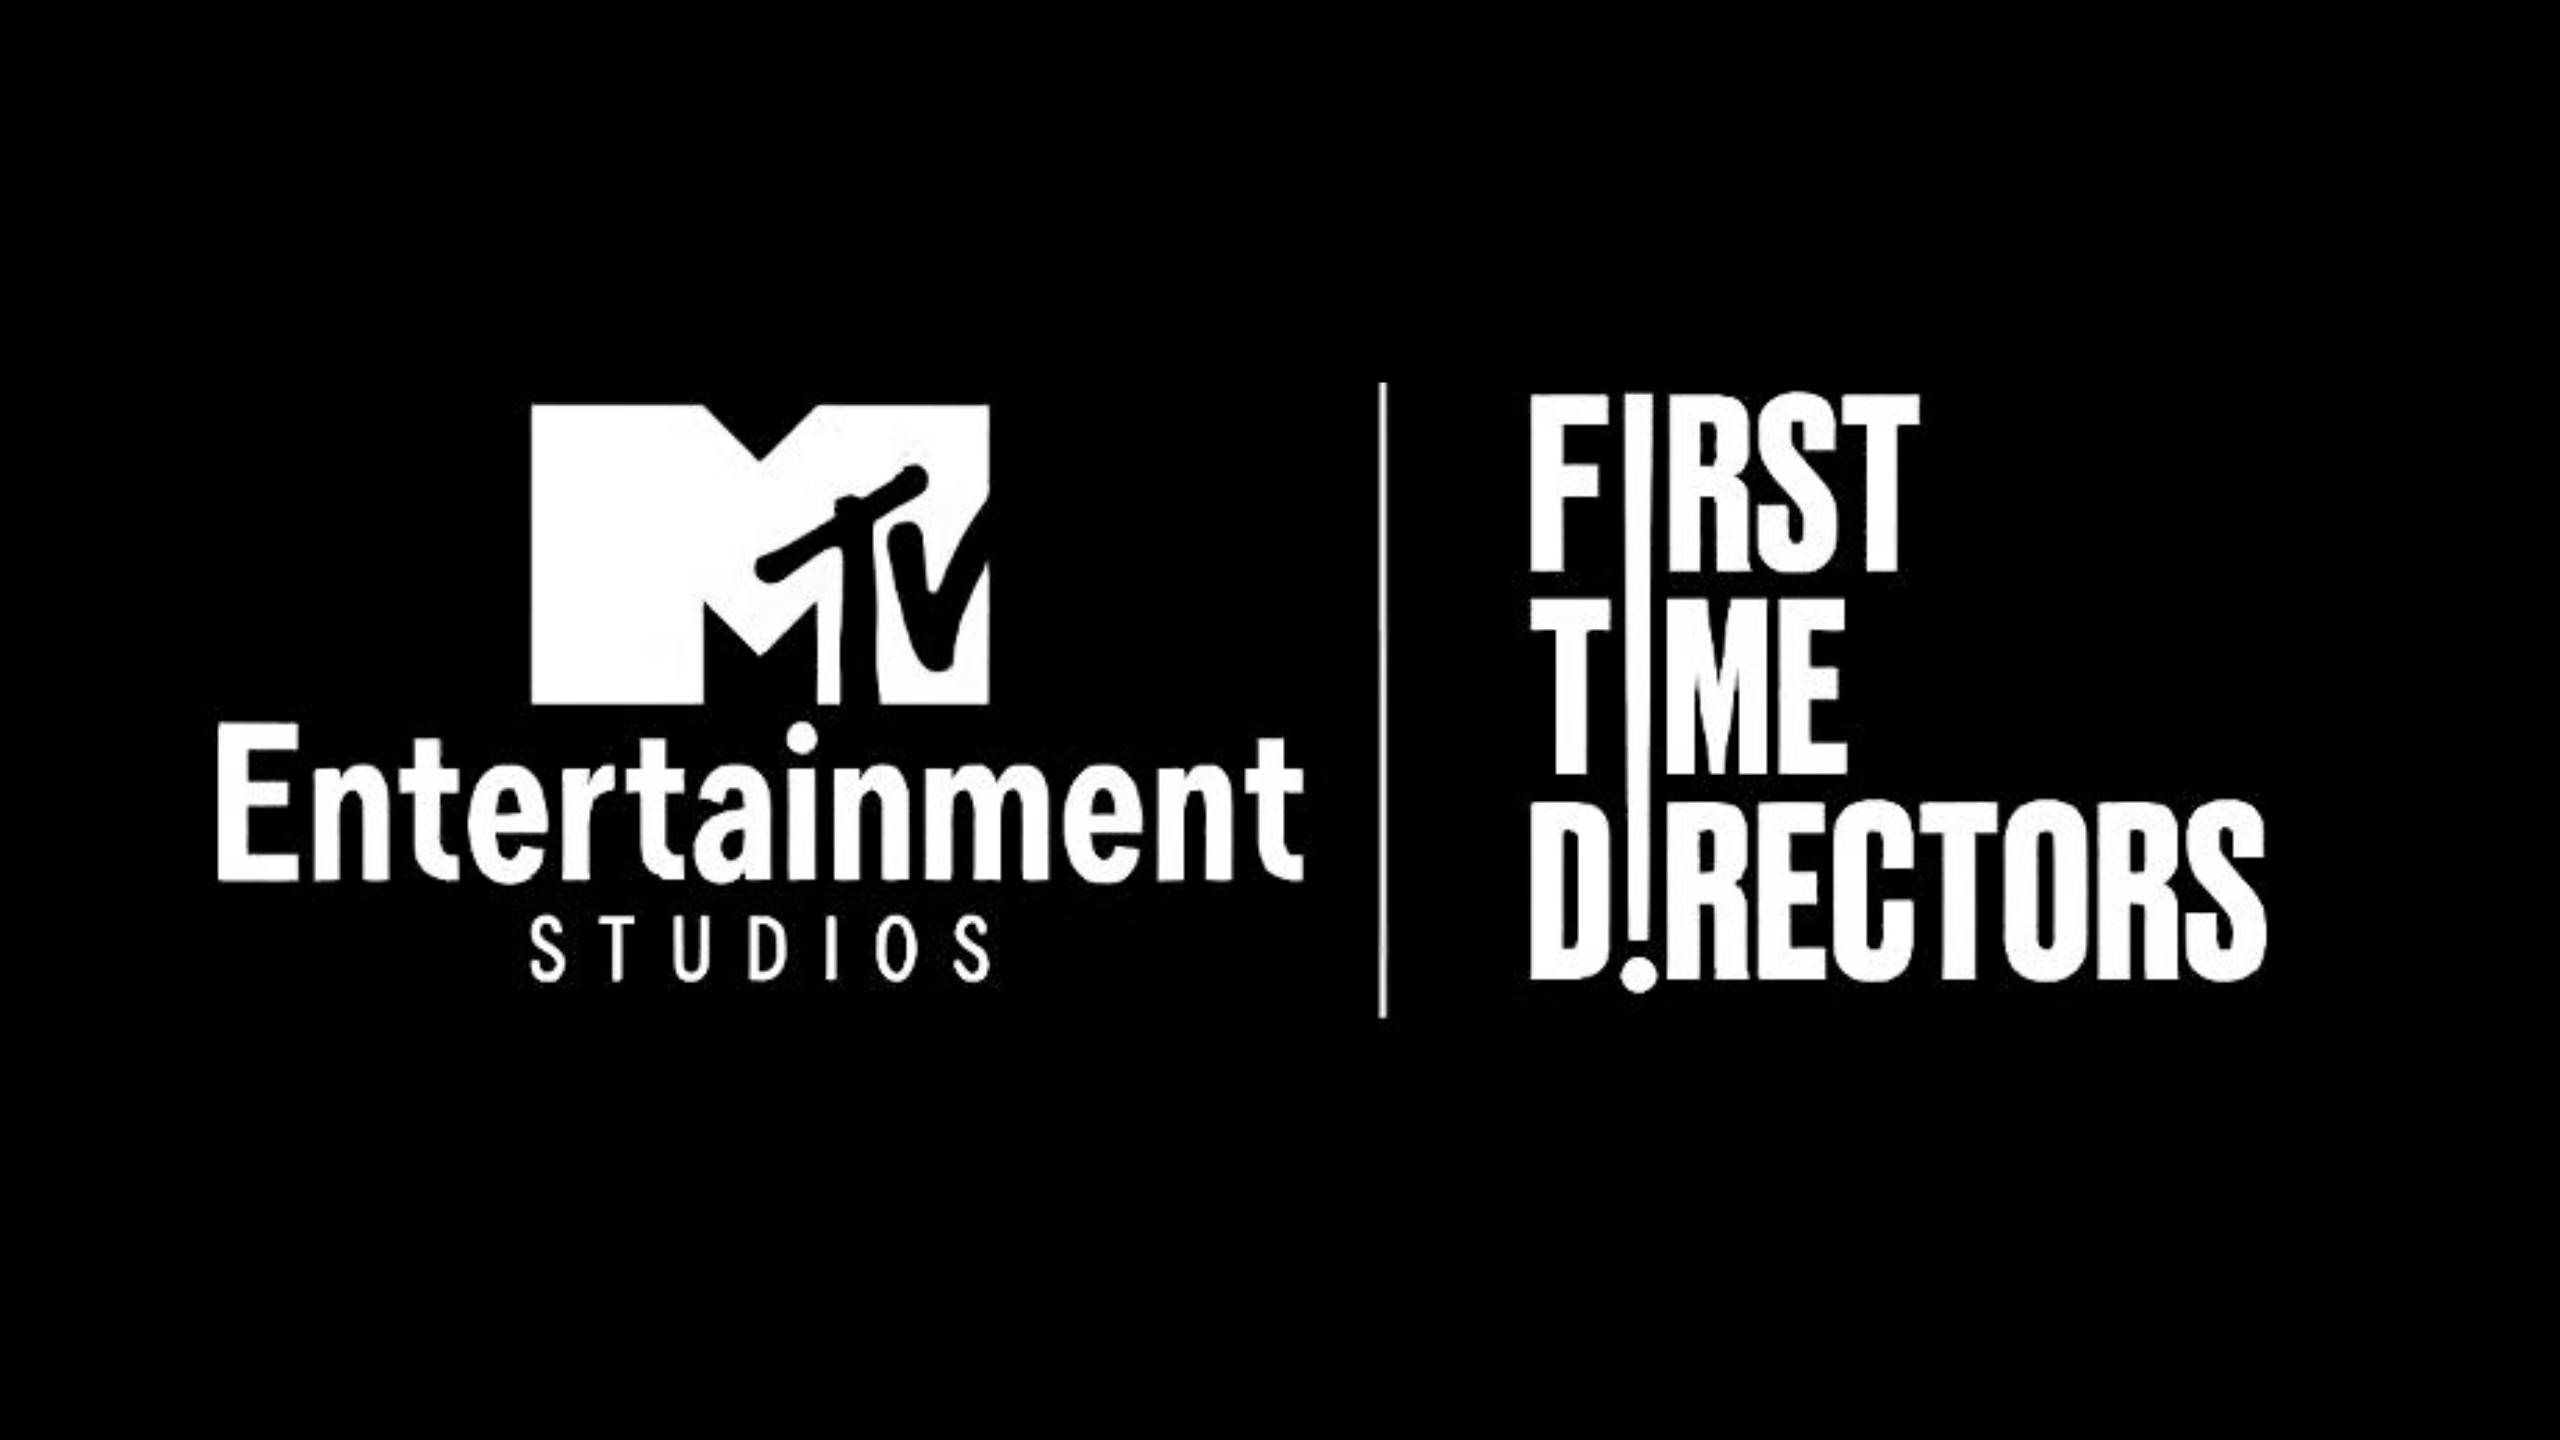 MTV: First Time Directors